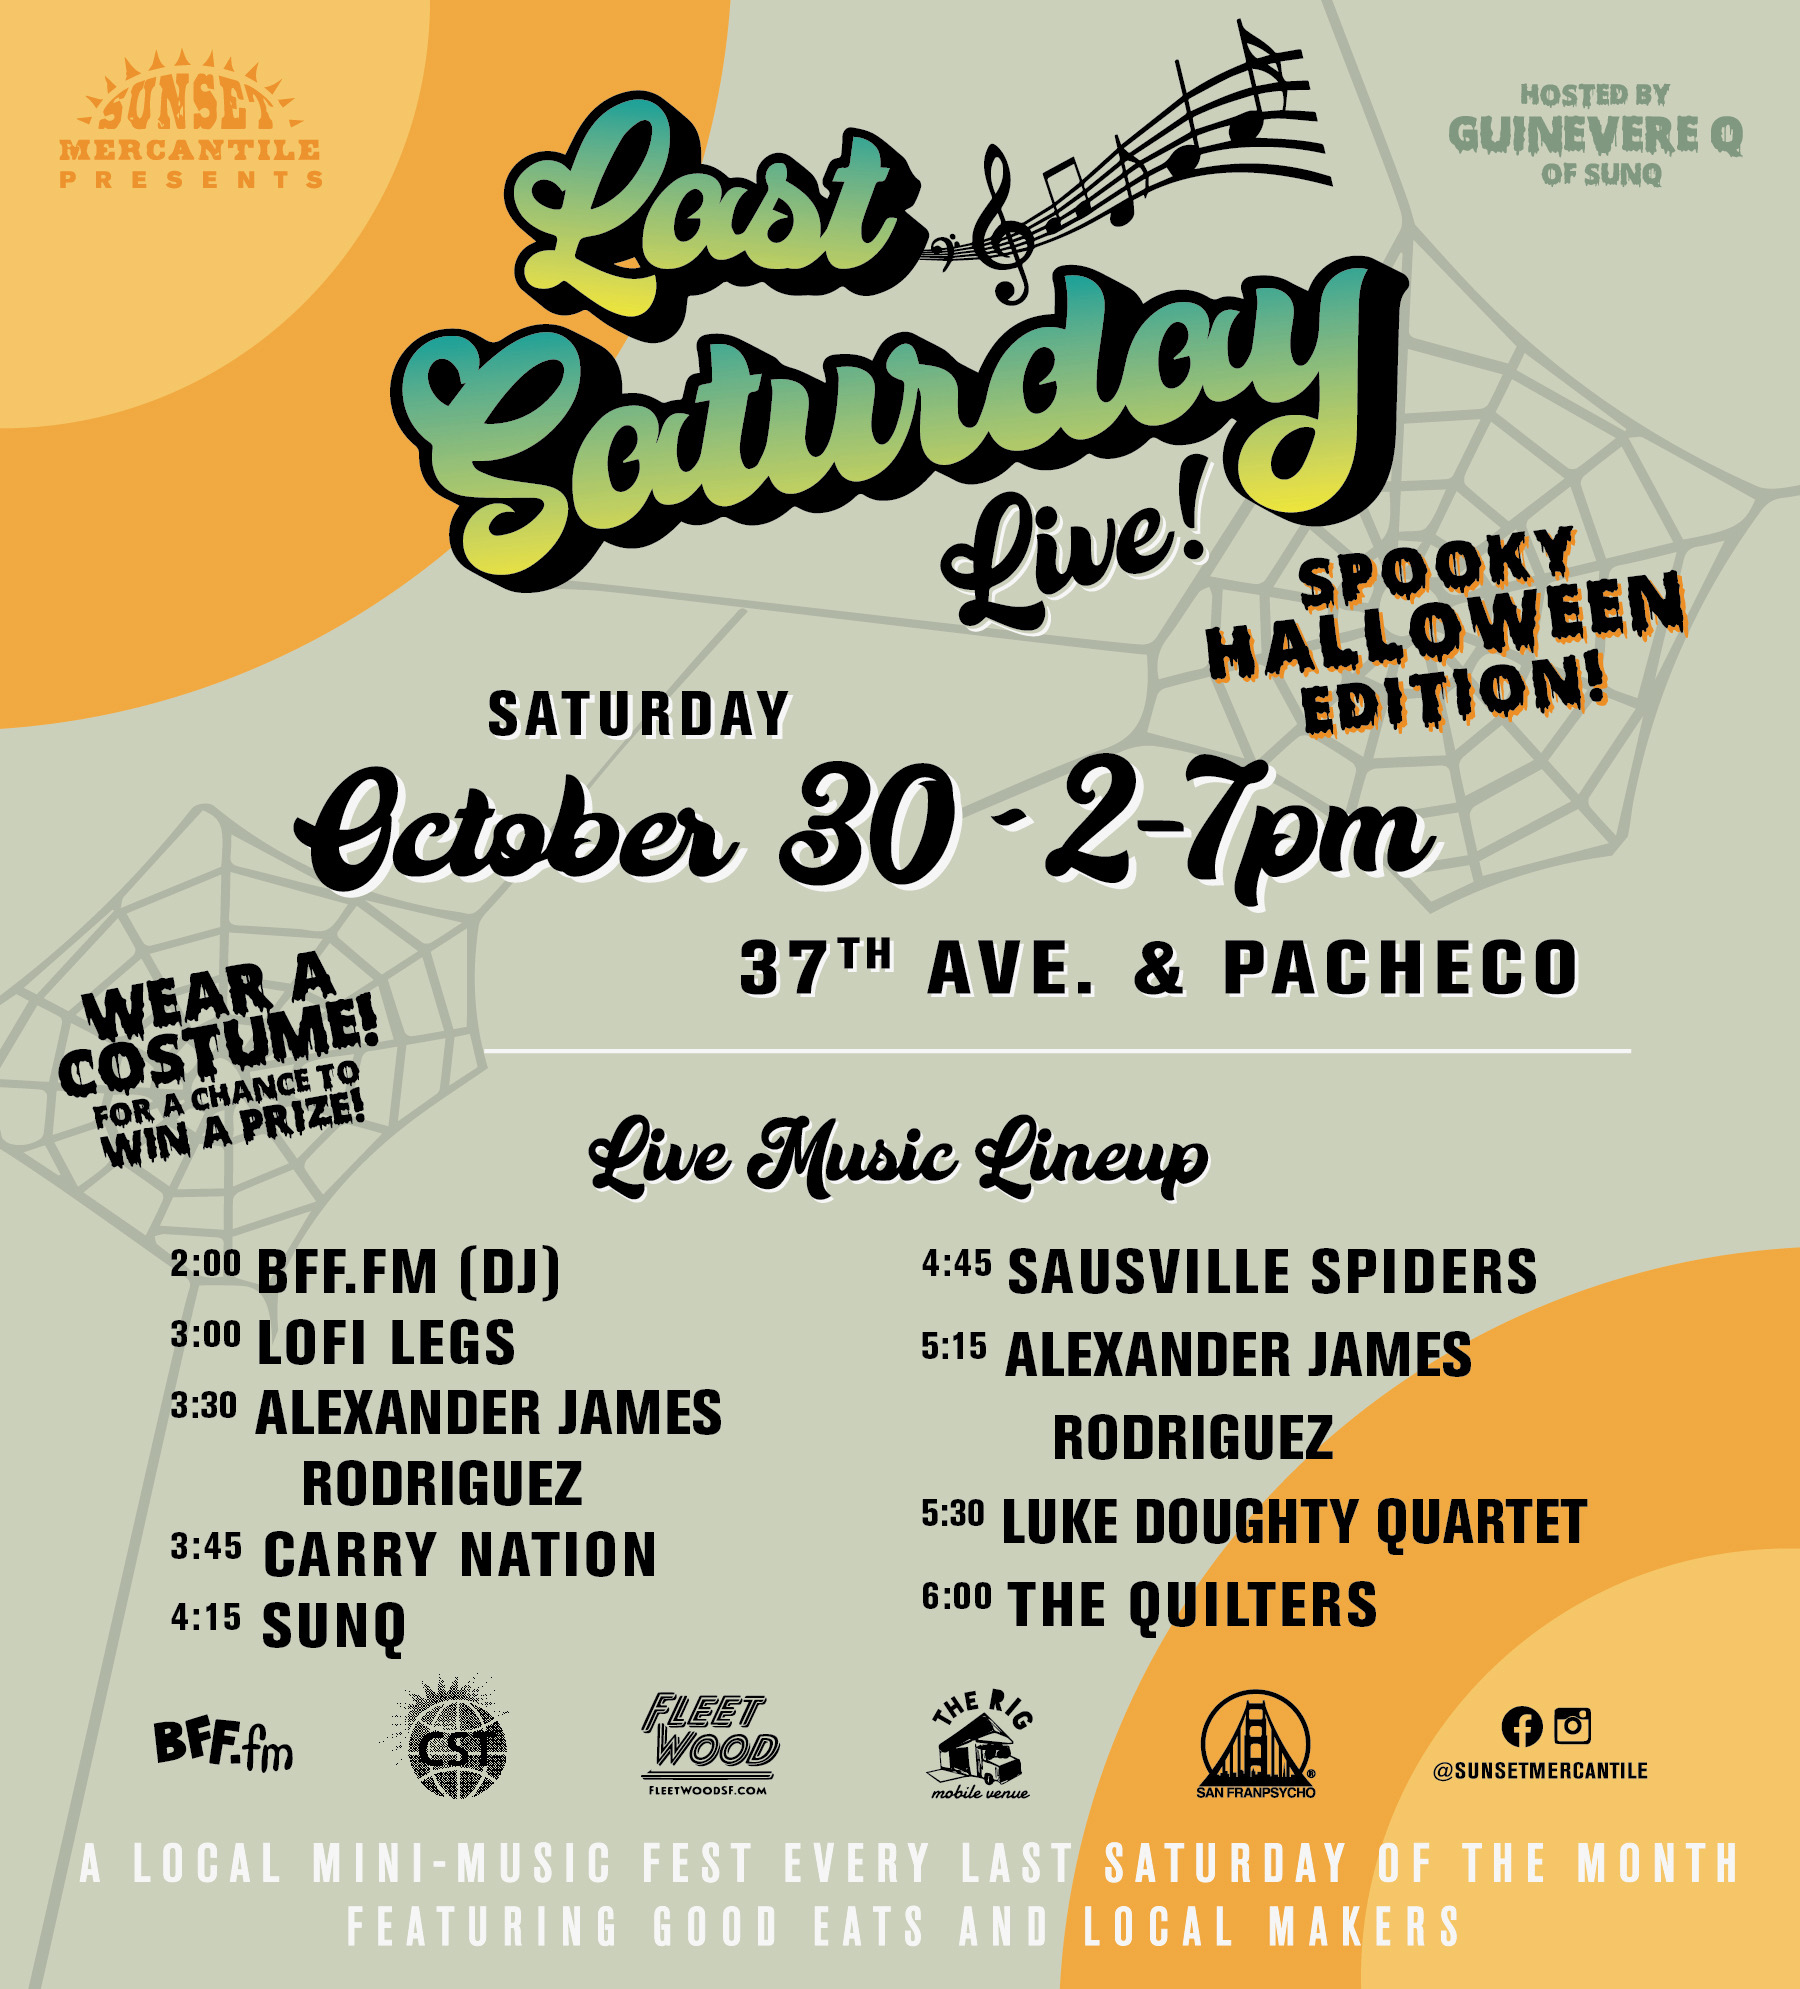 Last Saturday Live! Spooky Halloween Edition! Saturday, October 20 @ 2–7pm, 37th Ave. & Pacheco | Wear a Costume for a chance to win a prize. Live Music lineup. A local mini-music fest every last Saturday of the month, featuring good eats and local makers!